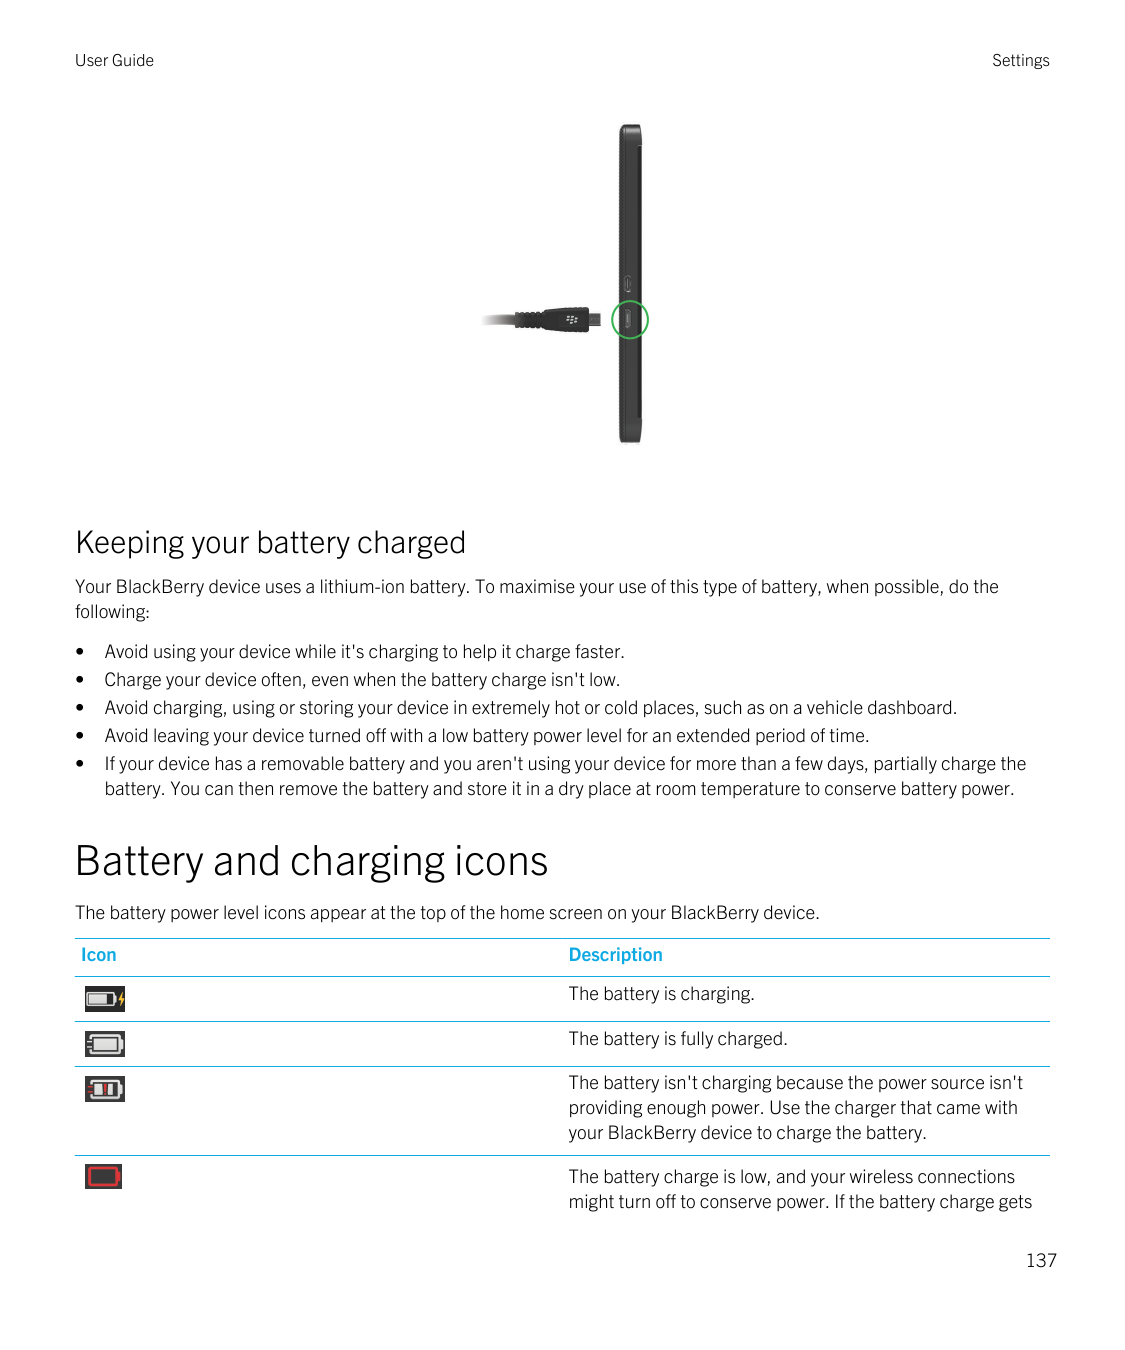 User GuideSettingsKeeping your battery chargedYour BlackBerry device uses a lithium-ion battery. To maximise your use of this ty